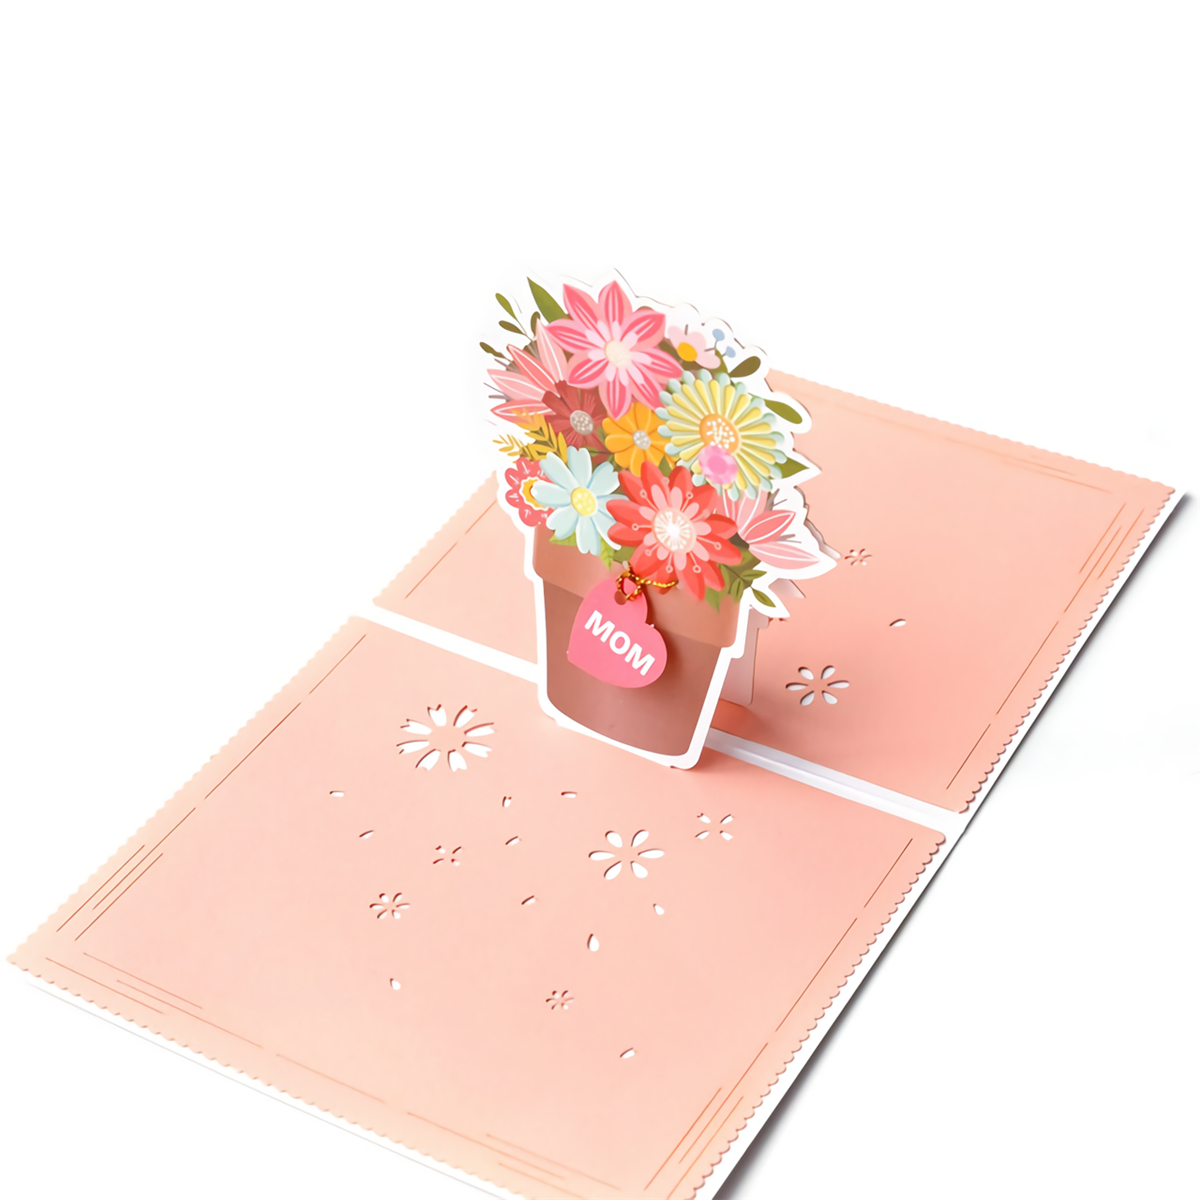 3D-Mothers-Day-Cards-Best-Mom-Flower-Basket-Paper-Invitation-Greeting-Cards-Anniversary-Birthday-Car-1667689-5